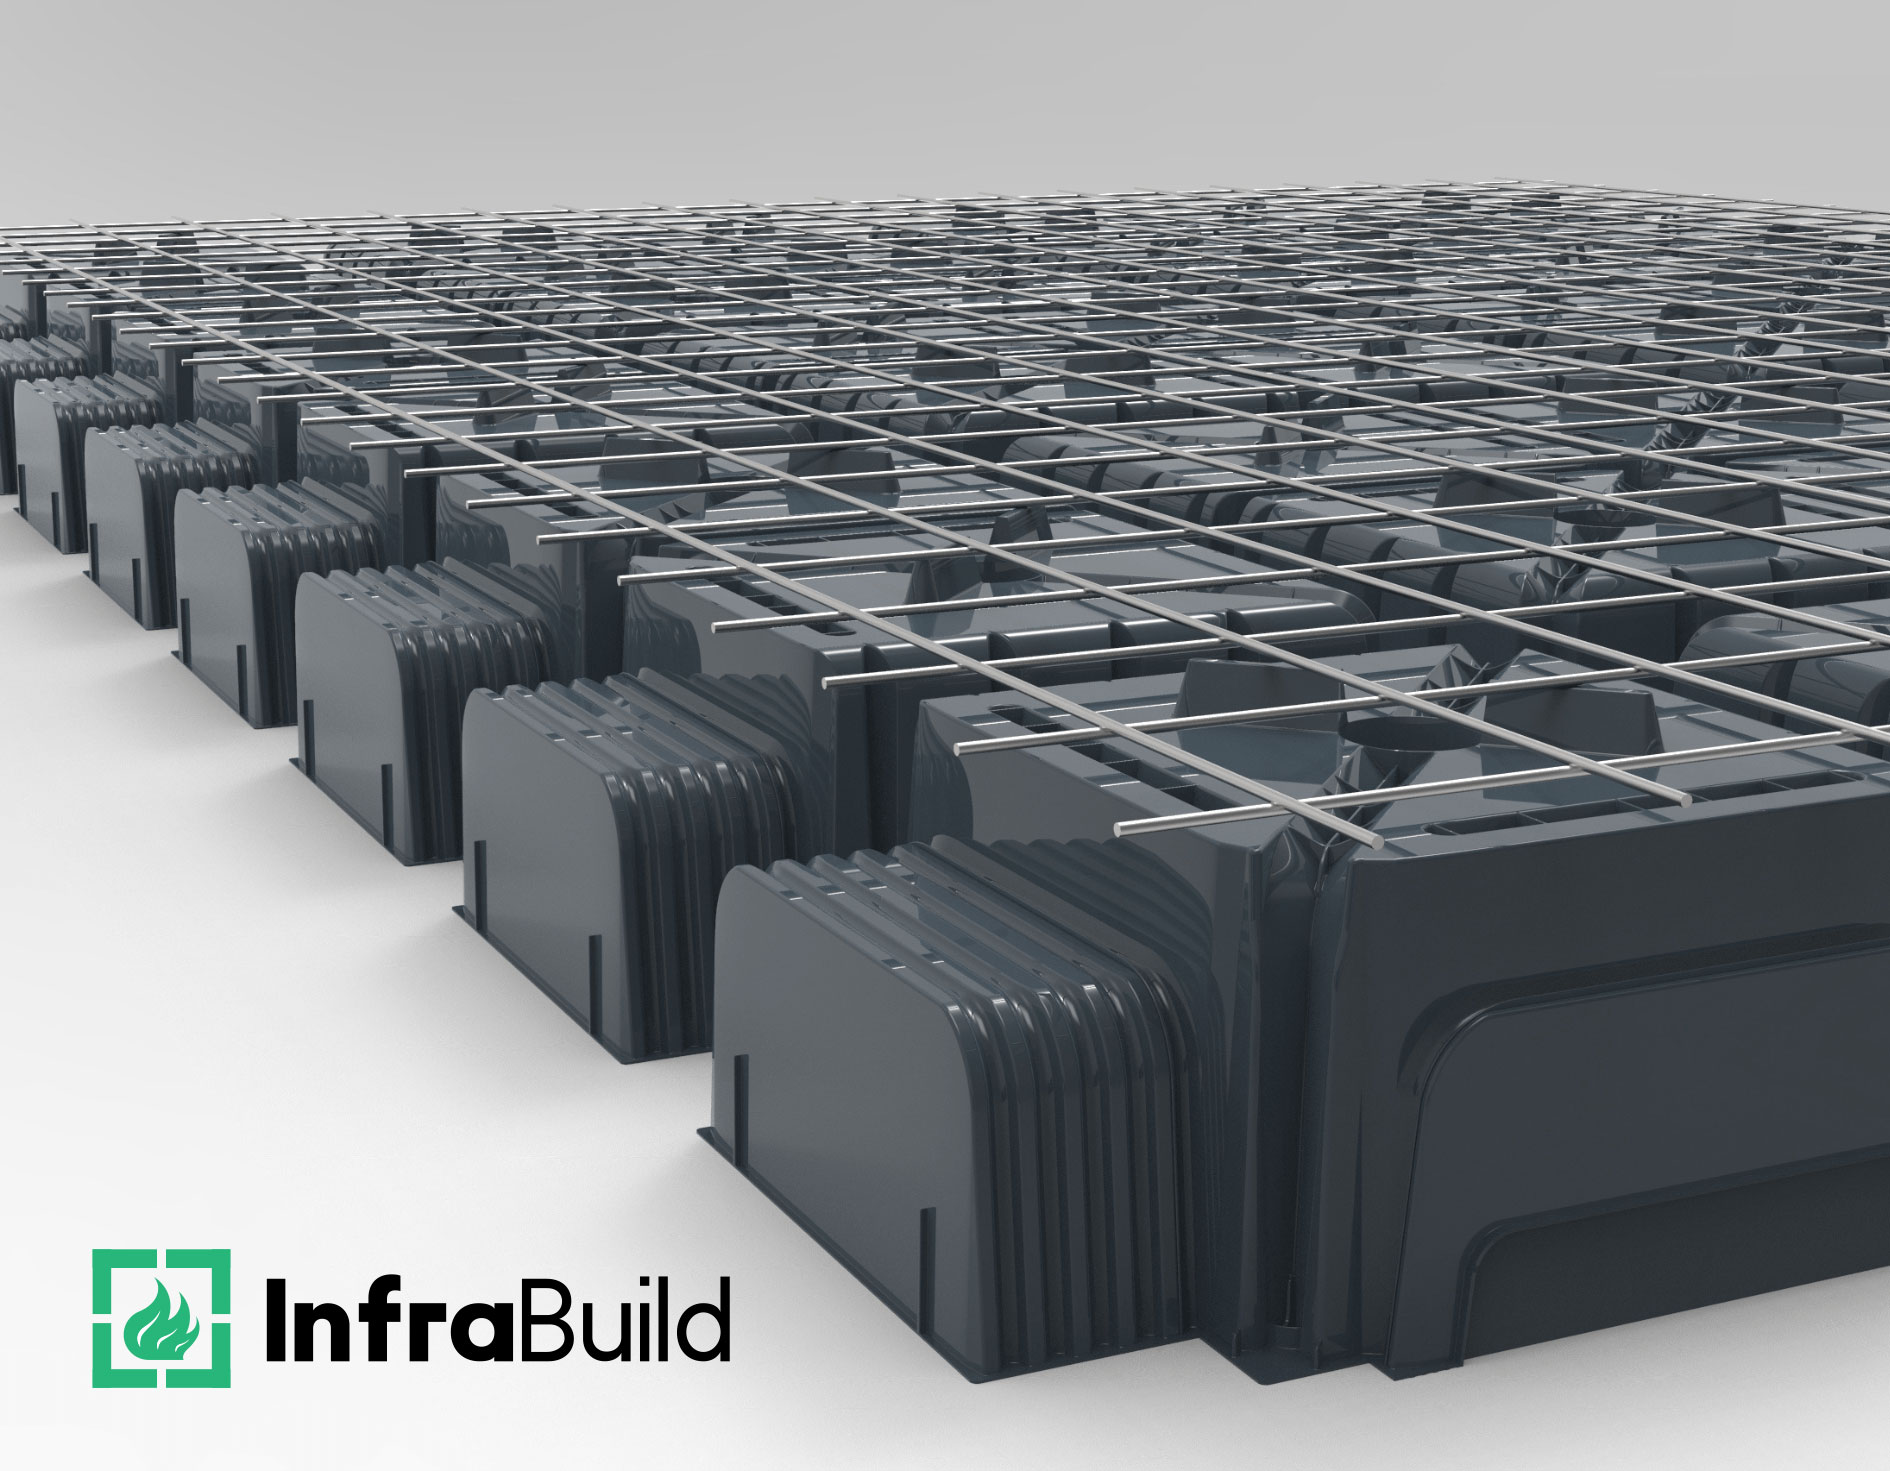 Infrabuild: Sustainable slab solution unlocking opportunities in residential construction